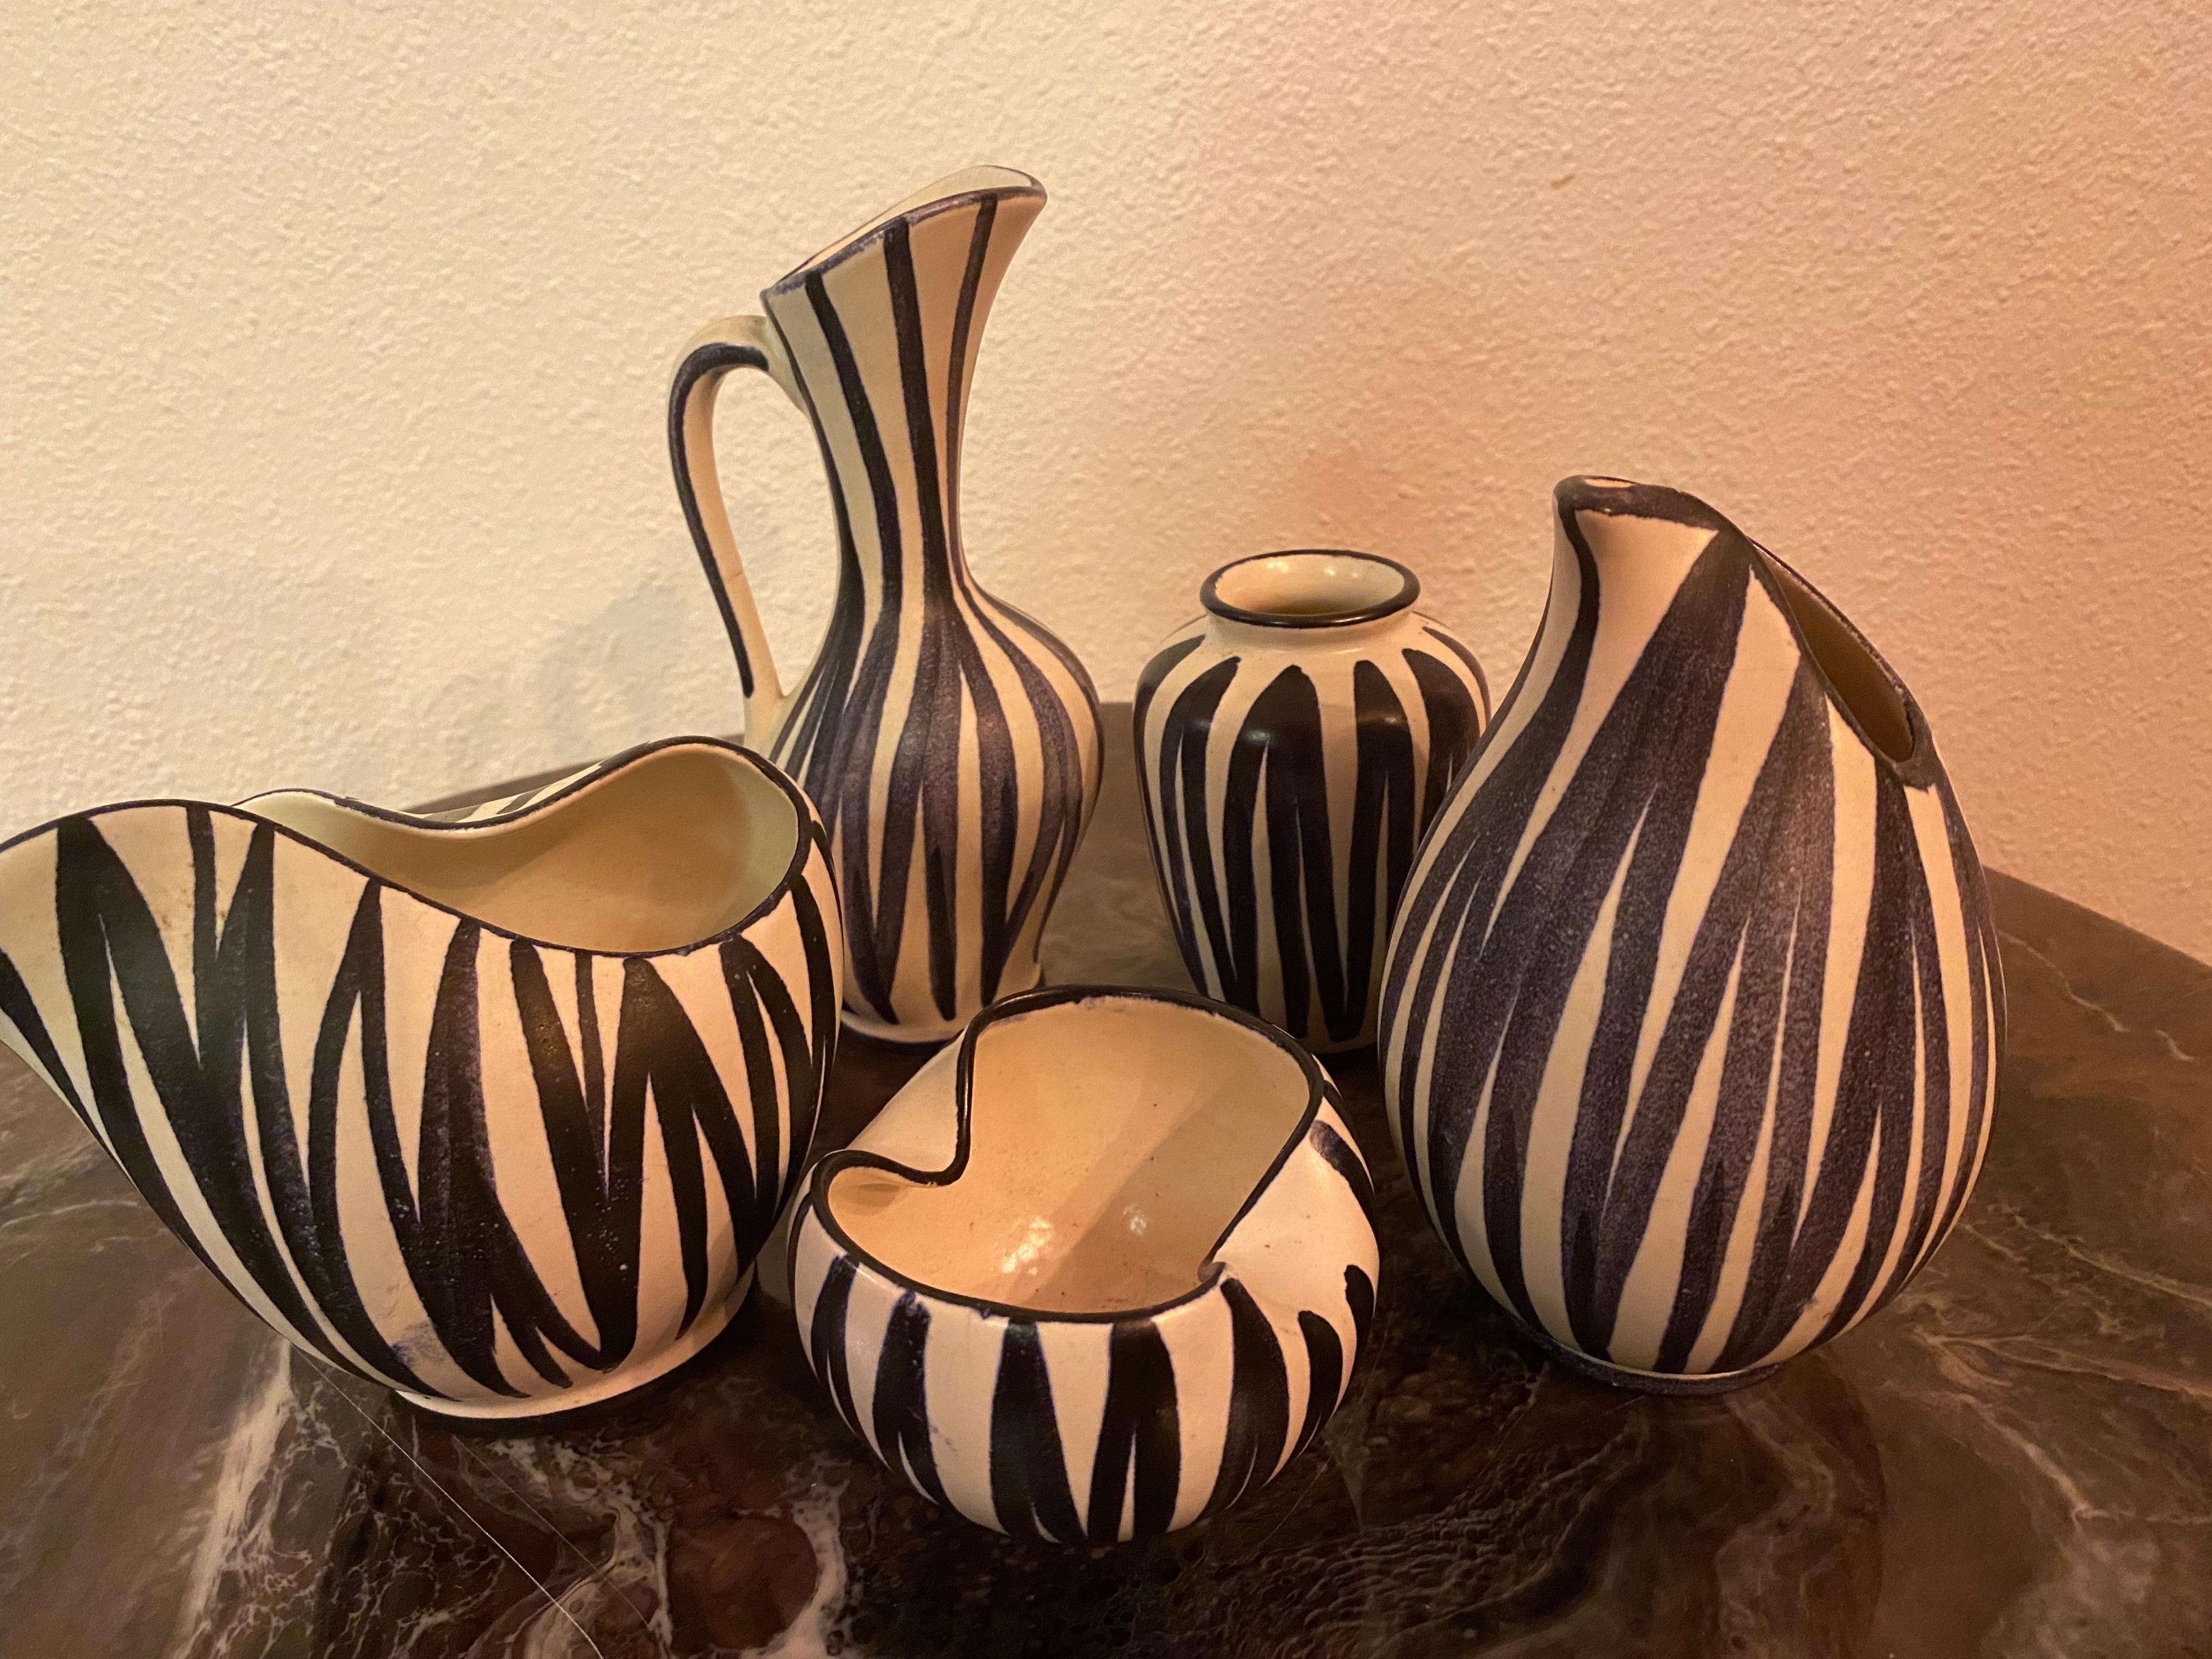 Just beautiful stylish tiny vases in matte glazing with black stripes. Typical decor and shapes from the fifties/sixties

